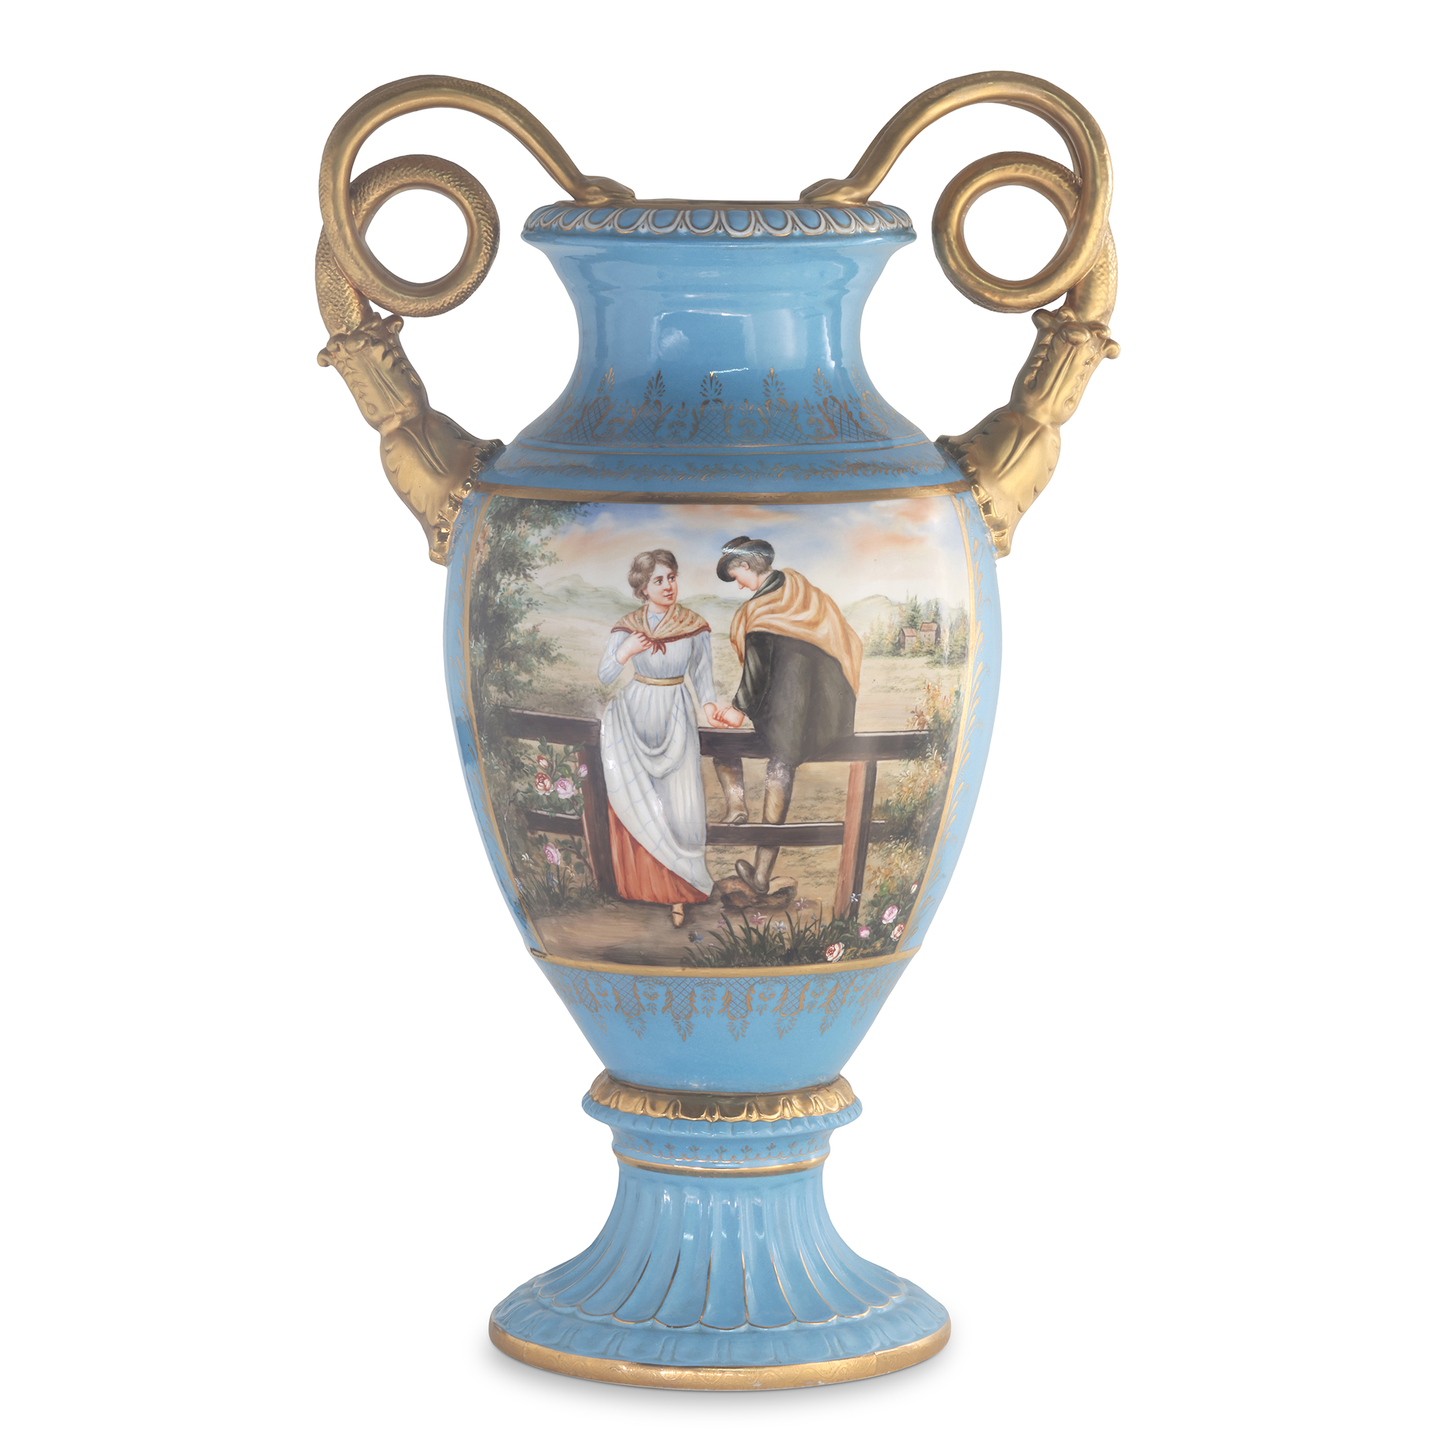 Rococo Style Vase with Hand-painted Motif & Snake Handles